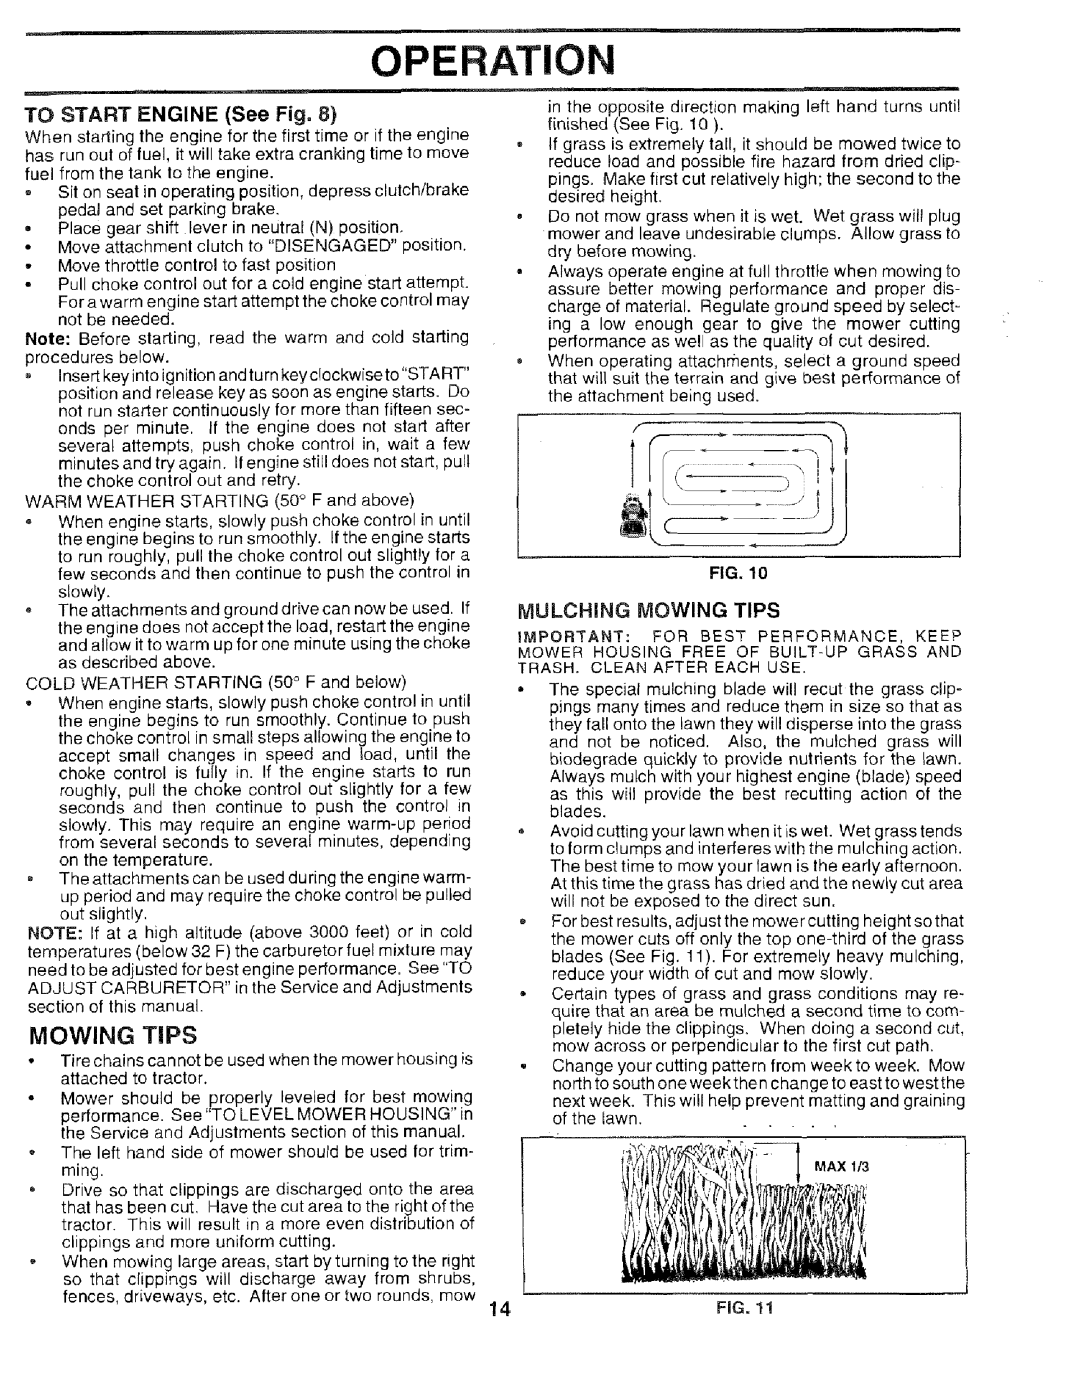 Sears 917.259567 owner manual TO START ENGINE See Fig, Mulching Mowing Tips 